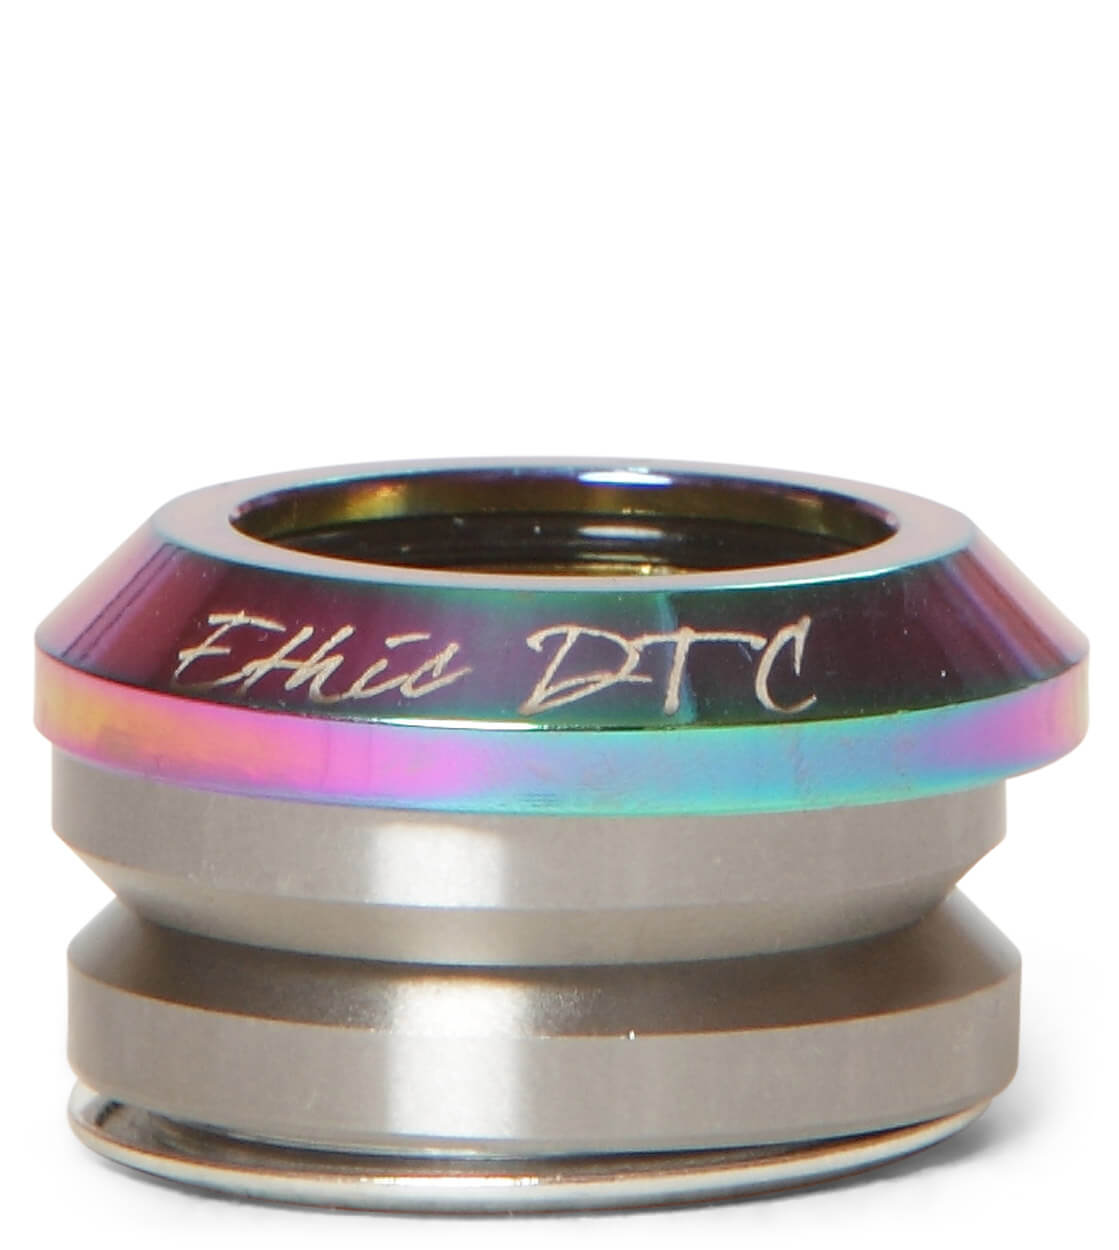 Ethic Integrated Headset DTC V3